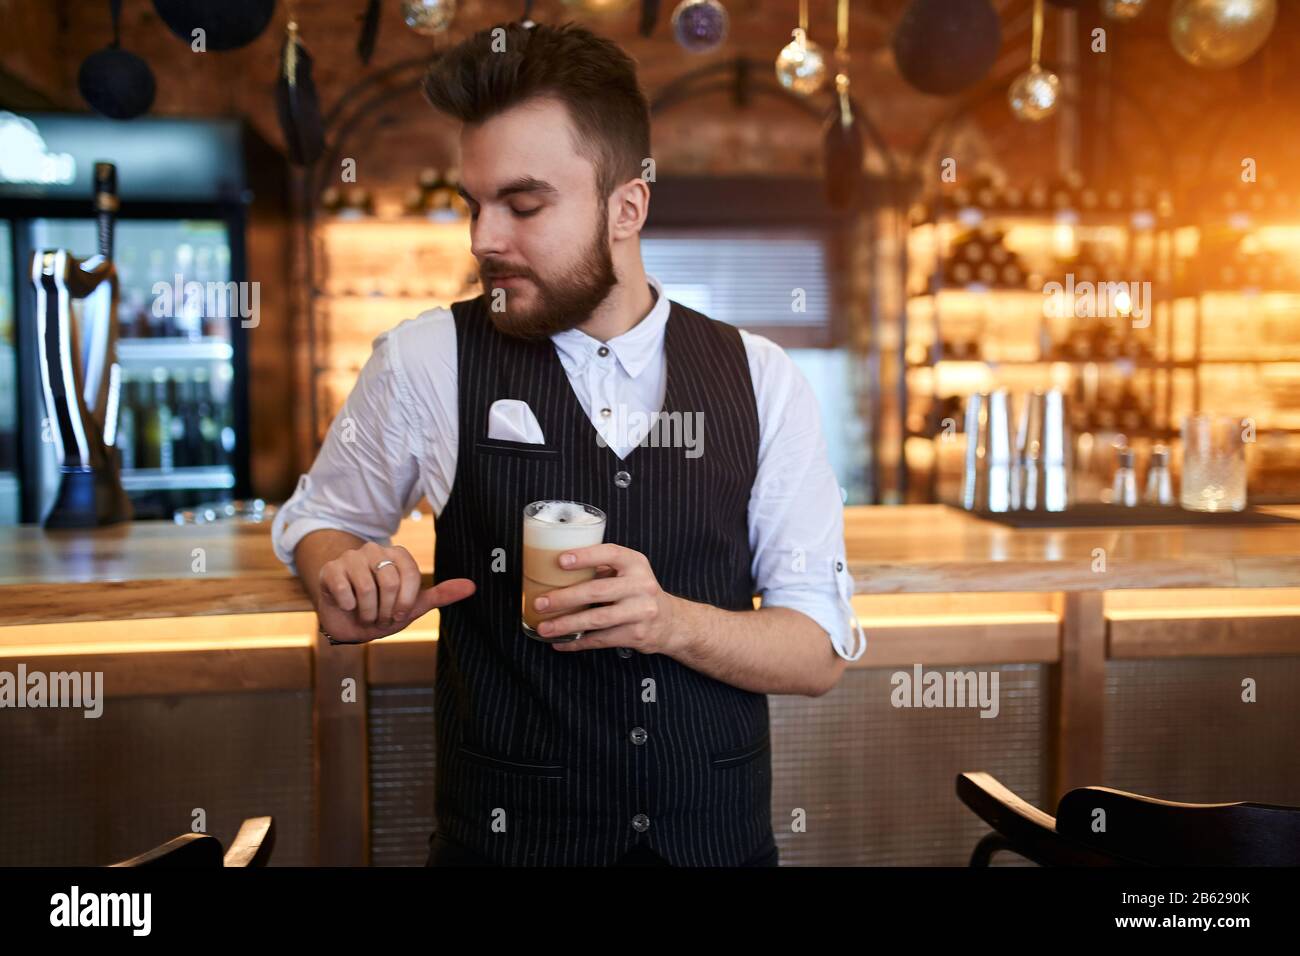 young barista holding glass and looking down wile standing in front of the table. close up photo Stock Photo